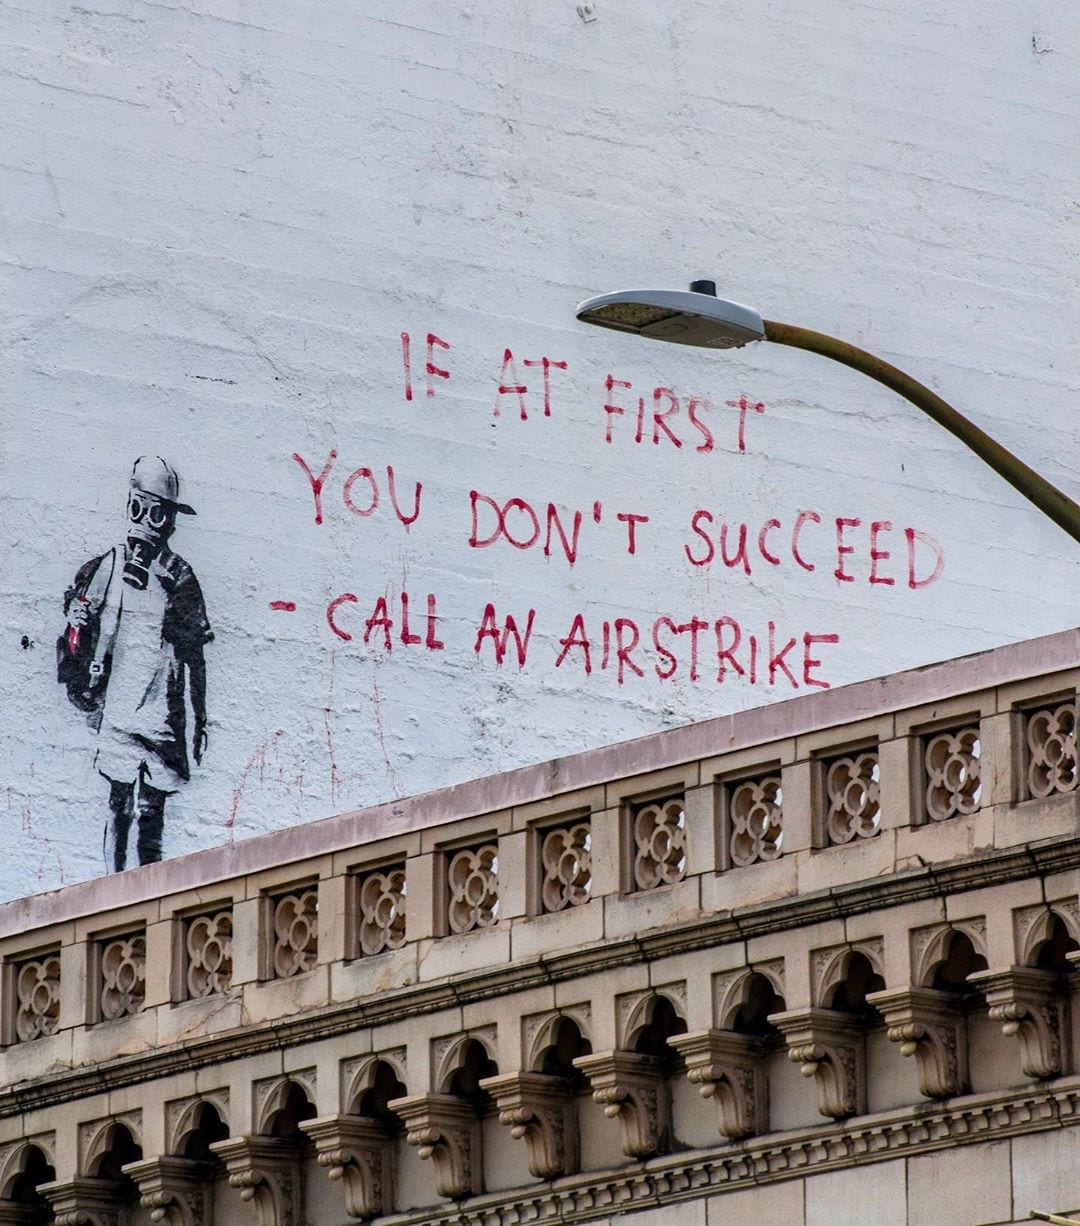 If at first you don't succeed, call an airstrike. Banksy in San Francisco